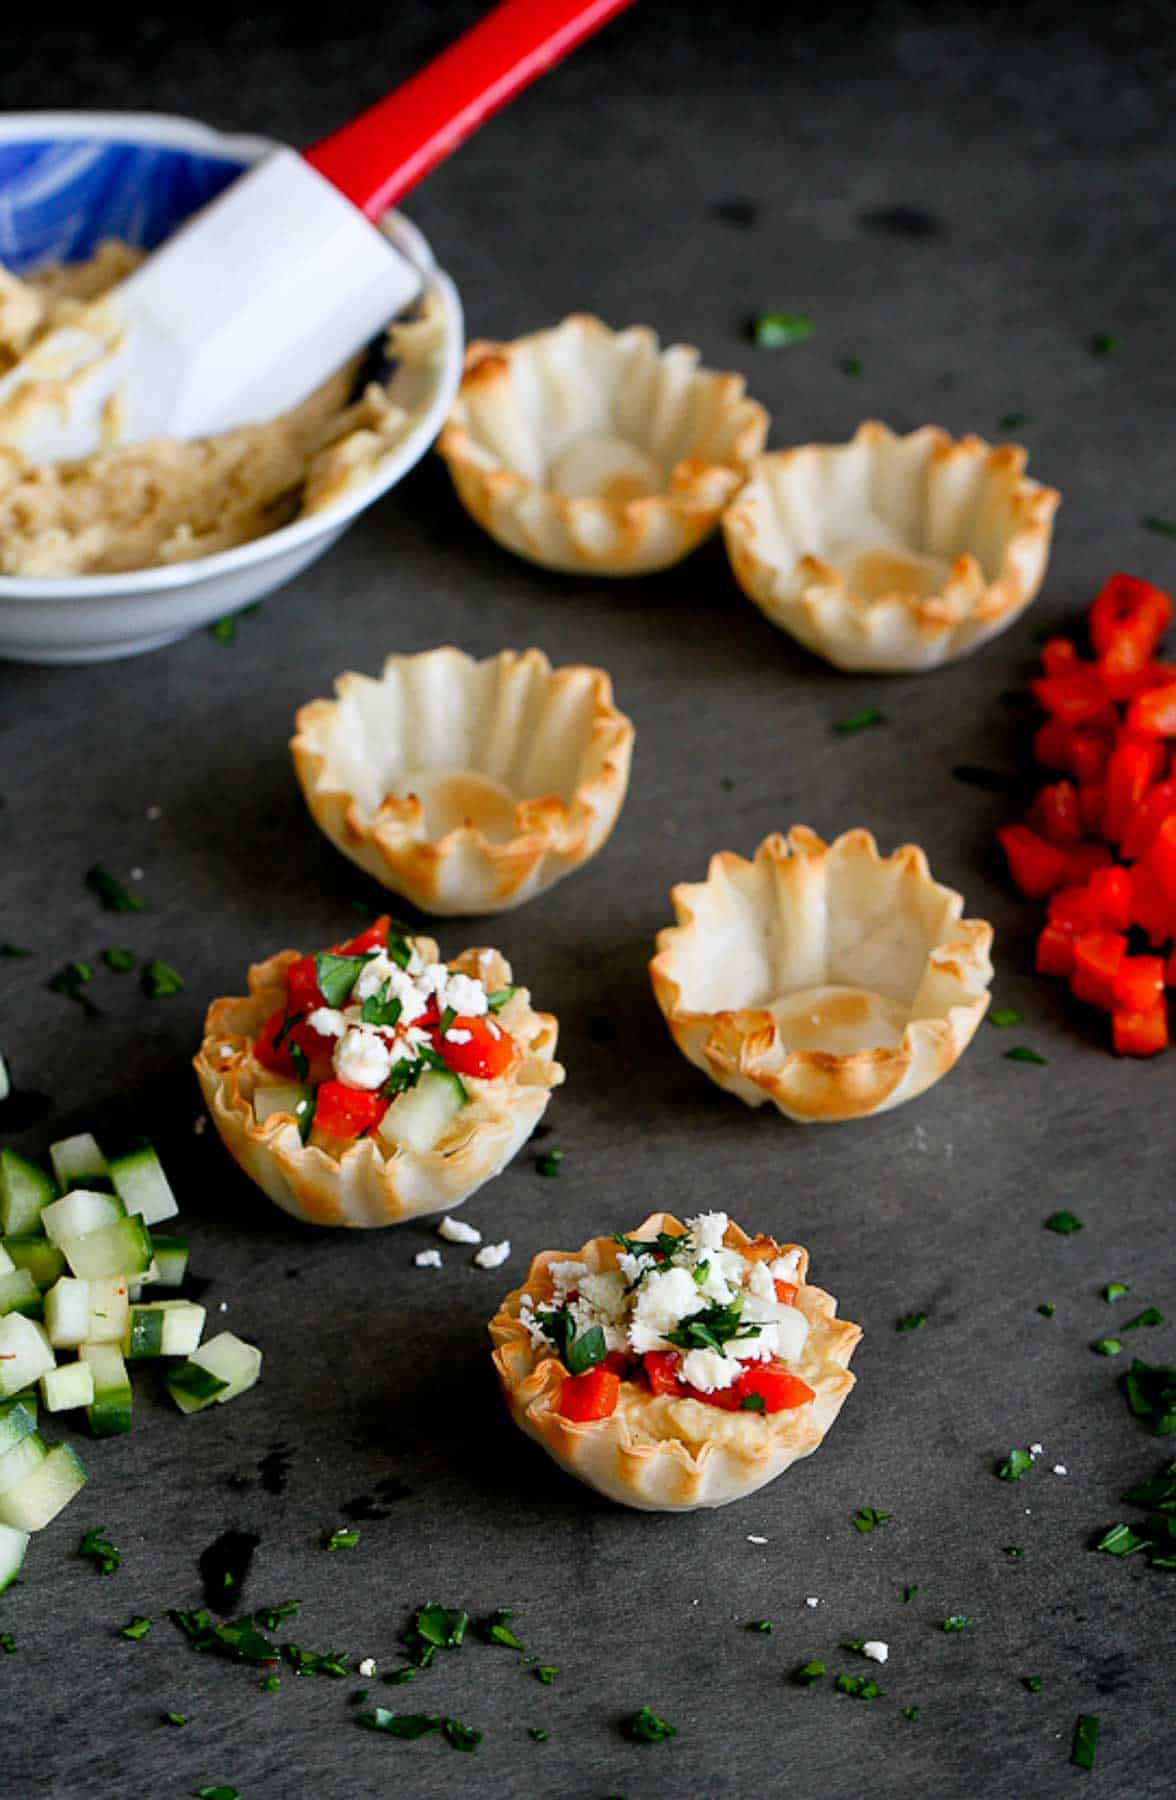 Phyllo shells, partially filled with hummus and vegetables, on a black cutting board.